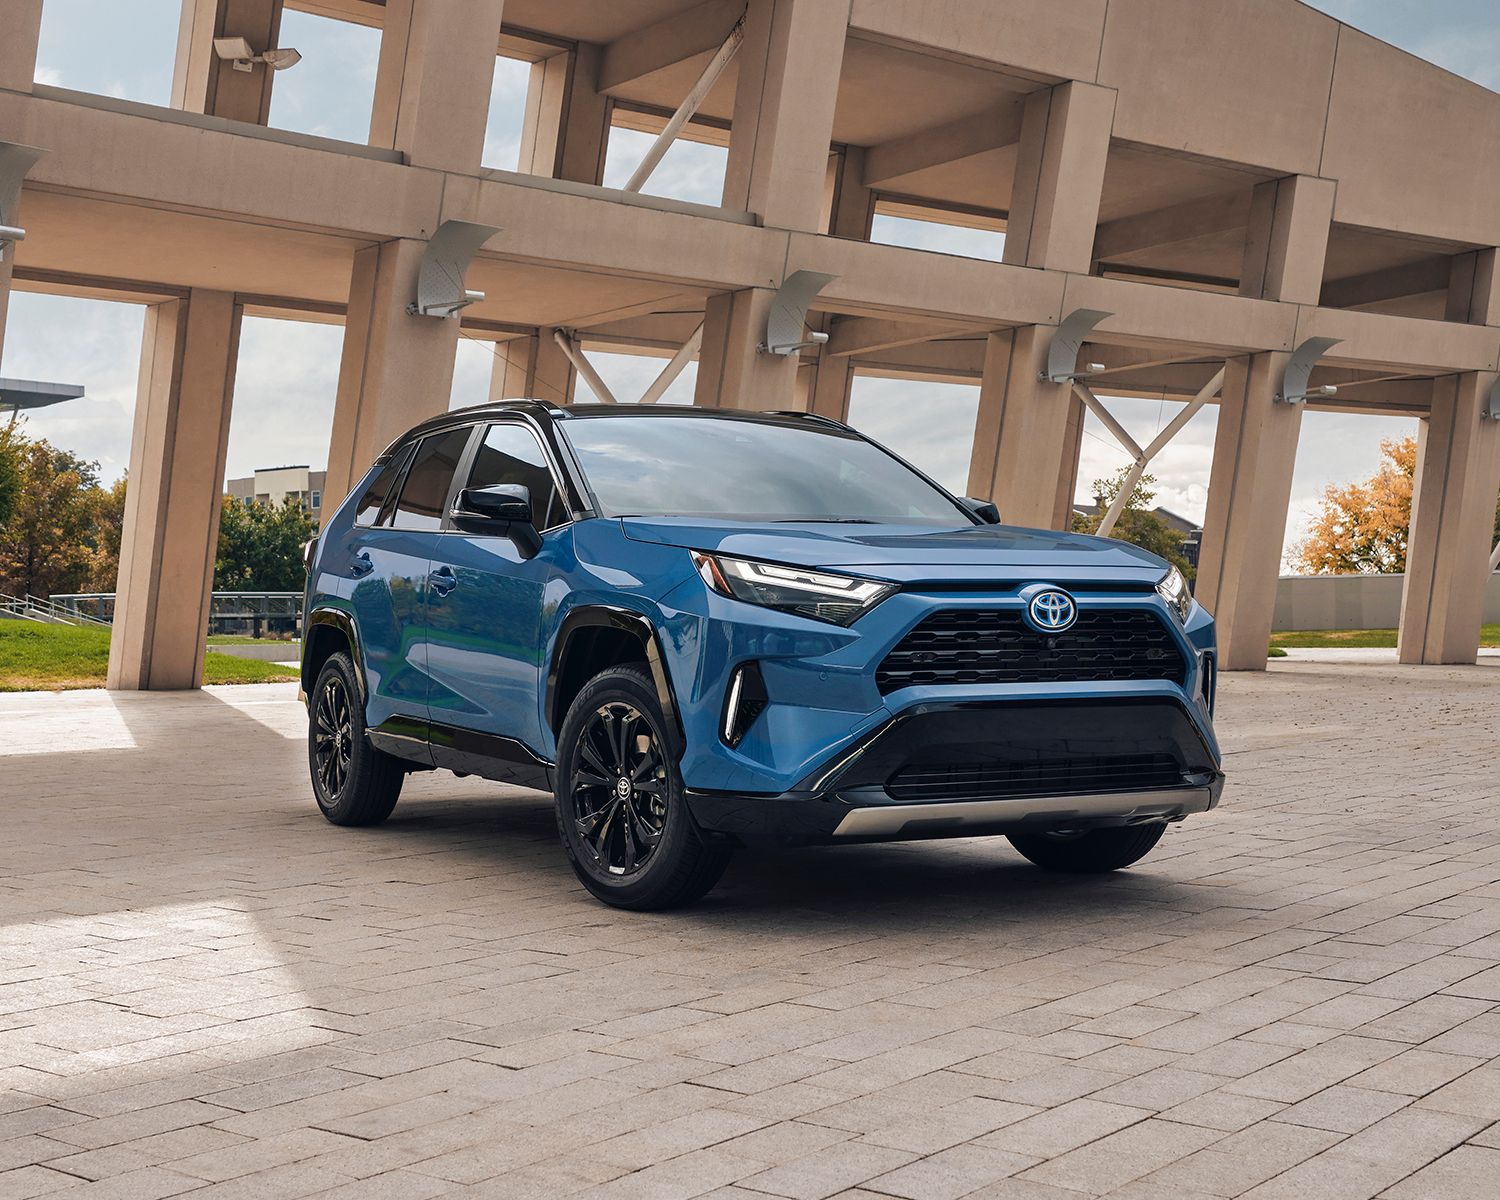 RAV4 Hybrid XSE shown in Cavalry Blue with Black Roof